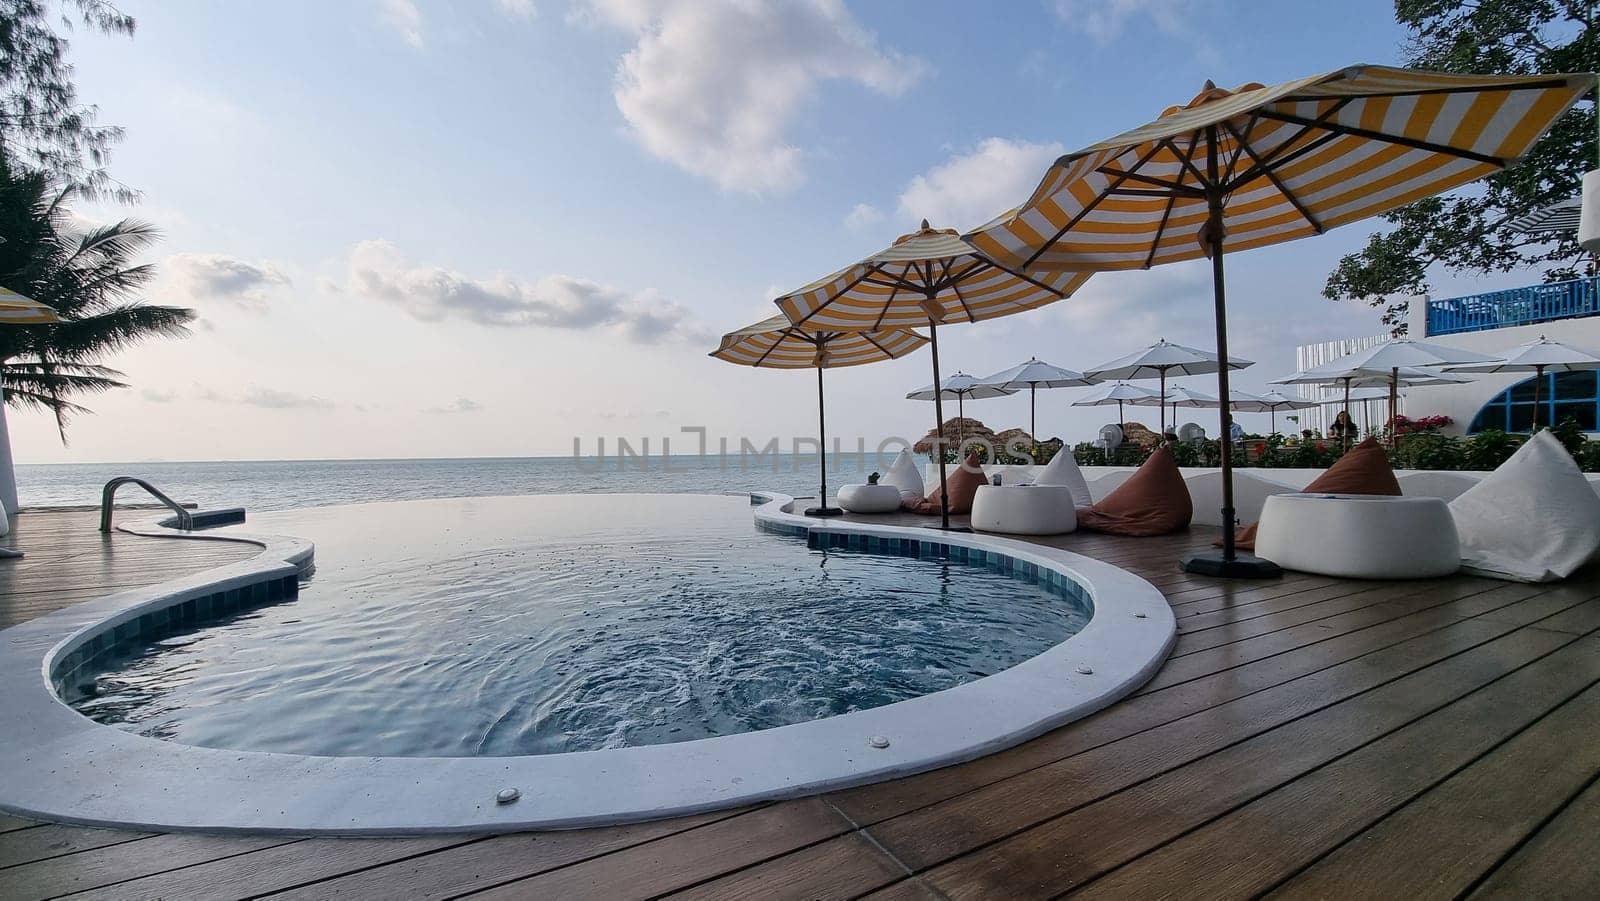 A luxurious, resort-style swimming pool surrounded by palm trees, overlooking a pristine sandy beach and crystal-clear ocean waves by fokkebok